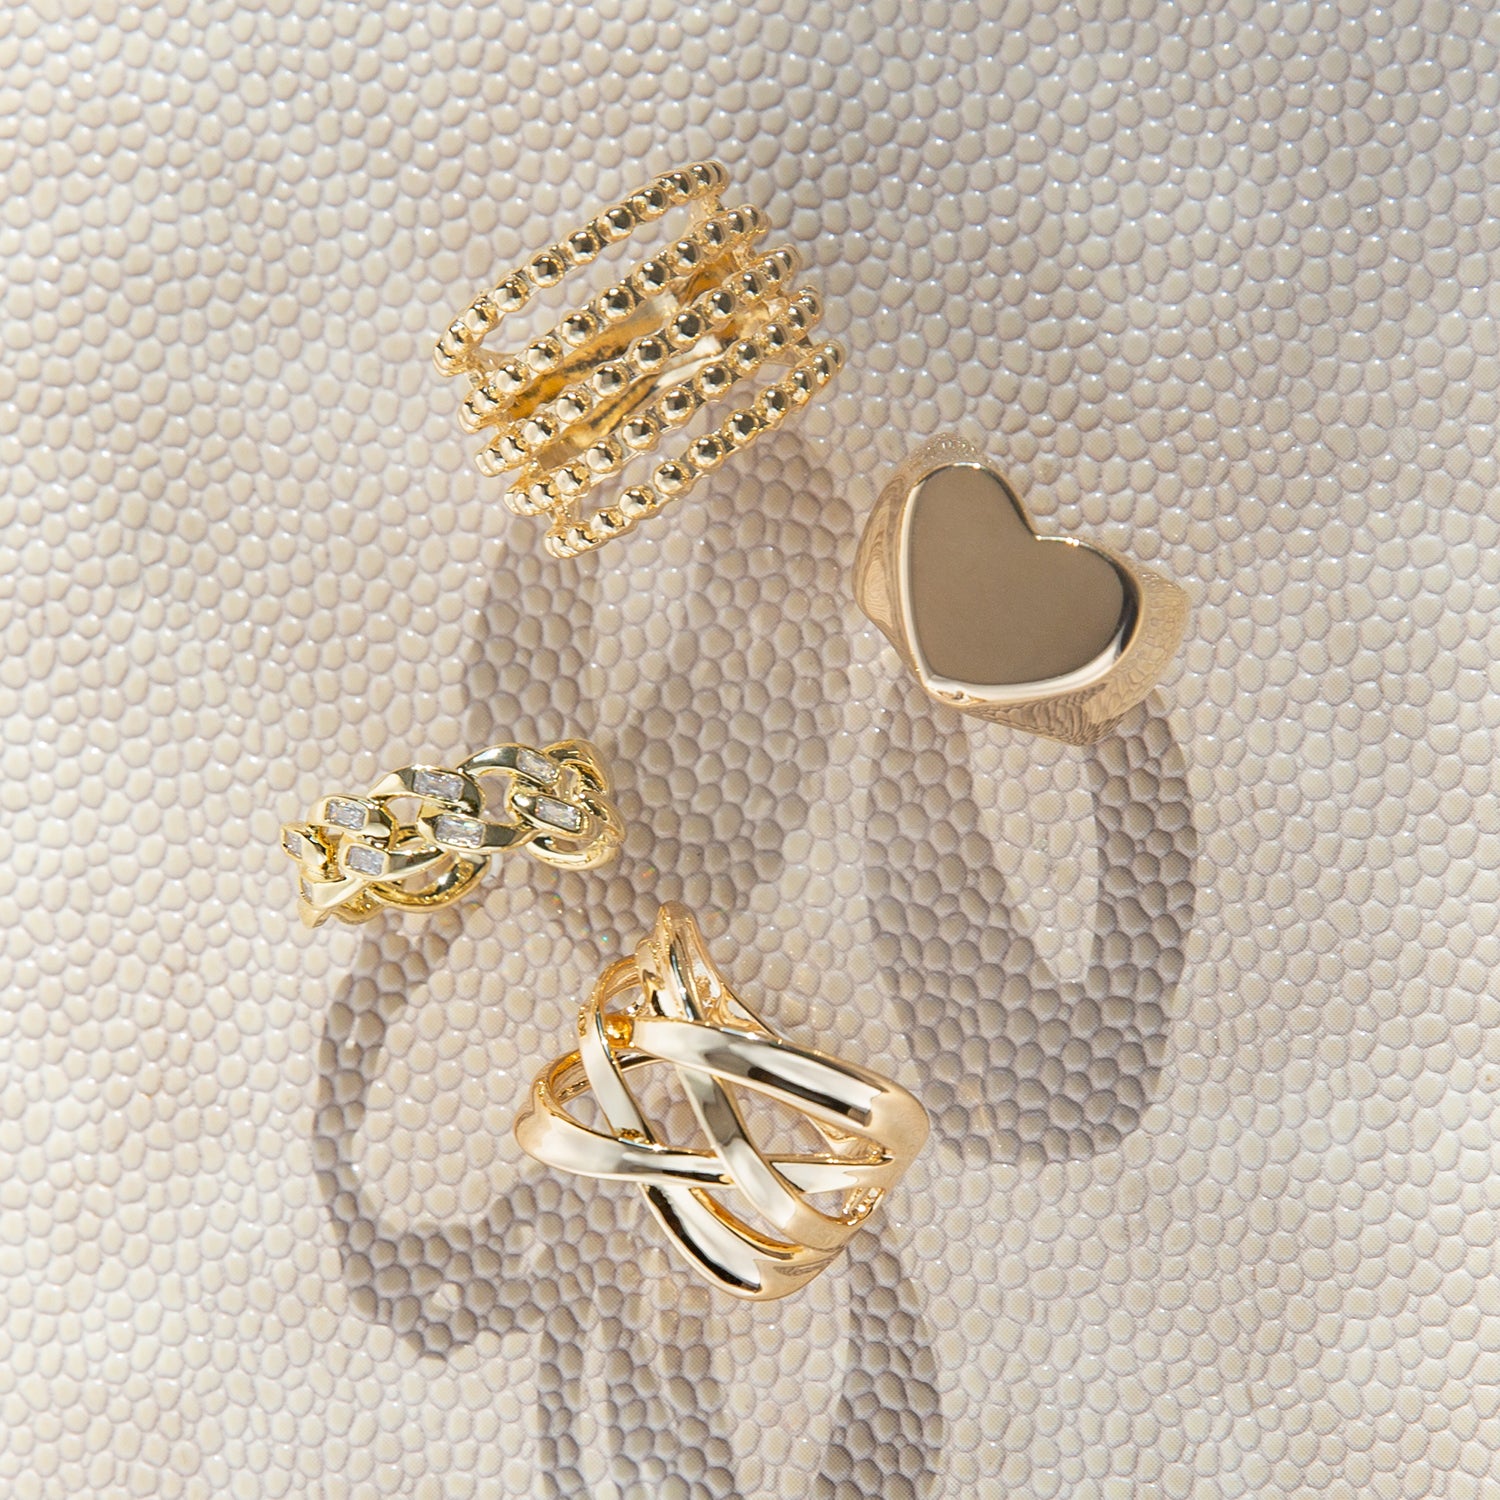 gold plated heart signet ring